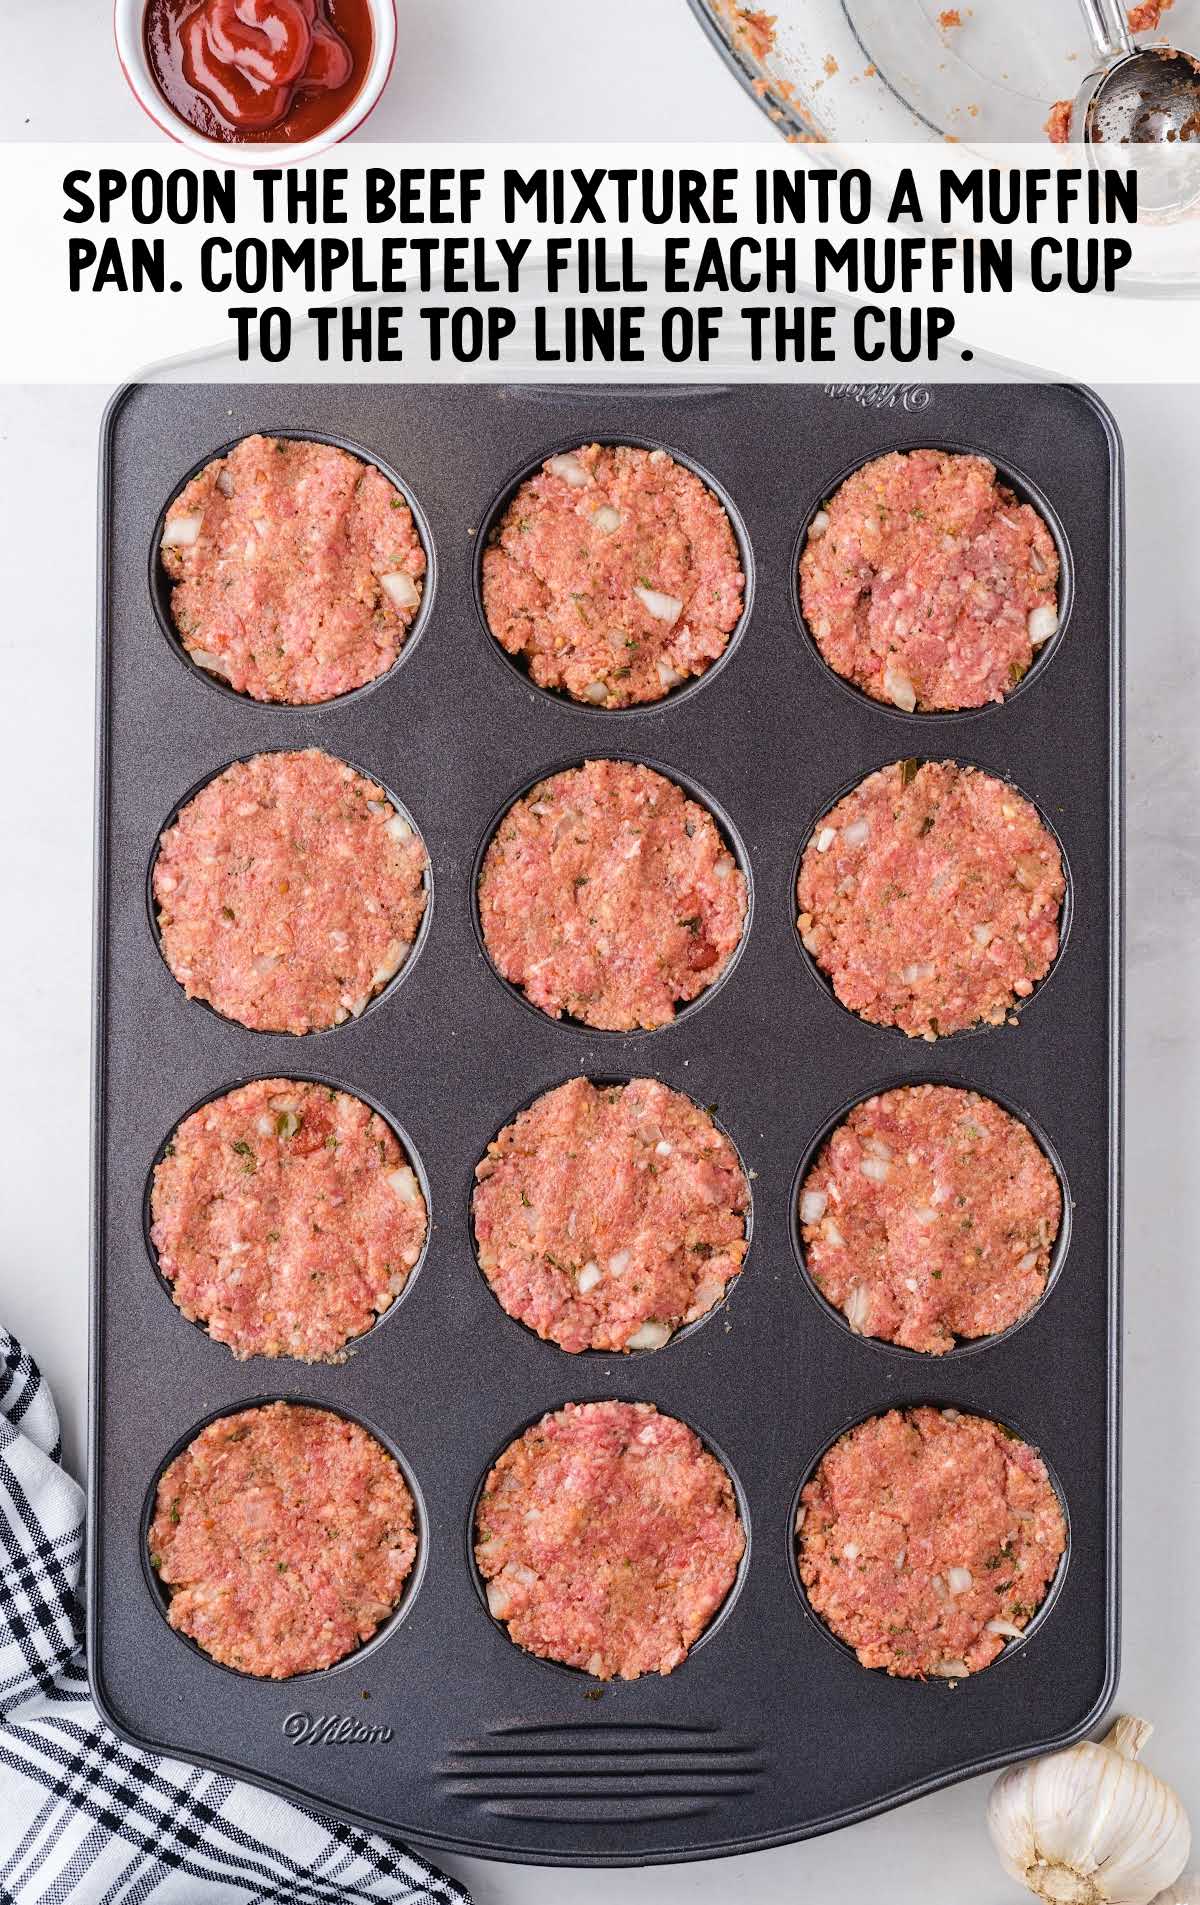 spoon beef mixture into a muffin pan